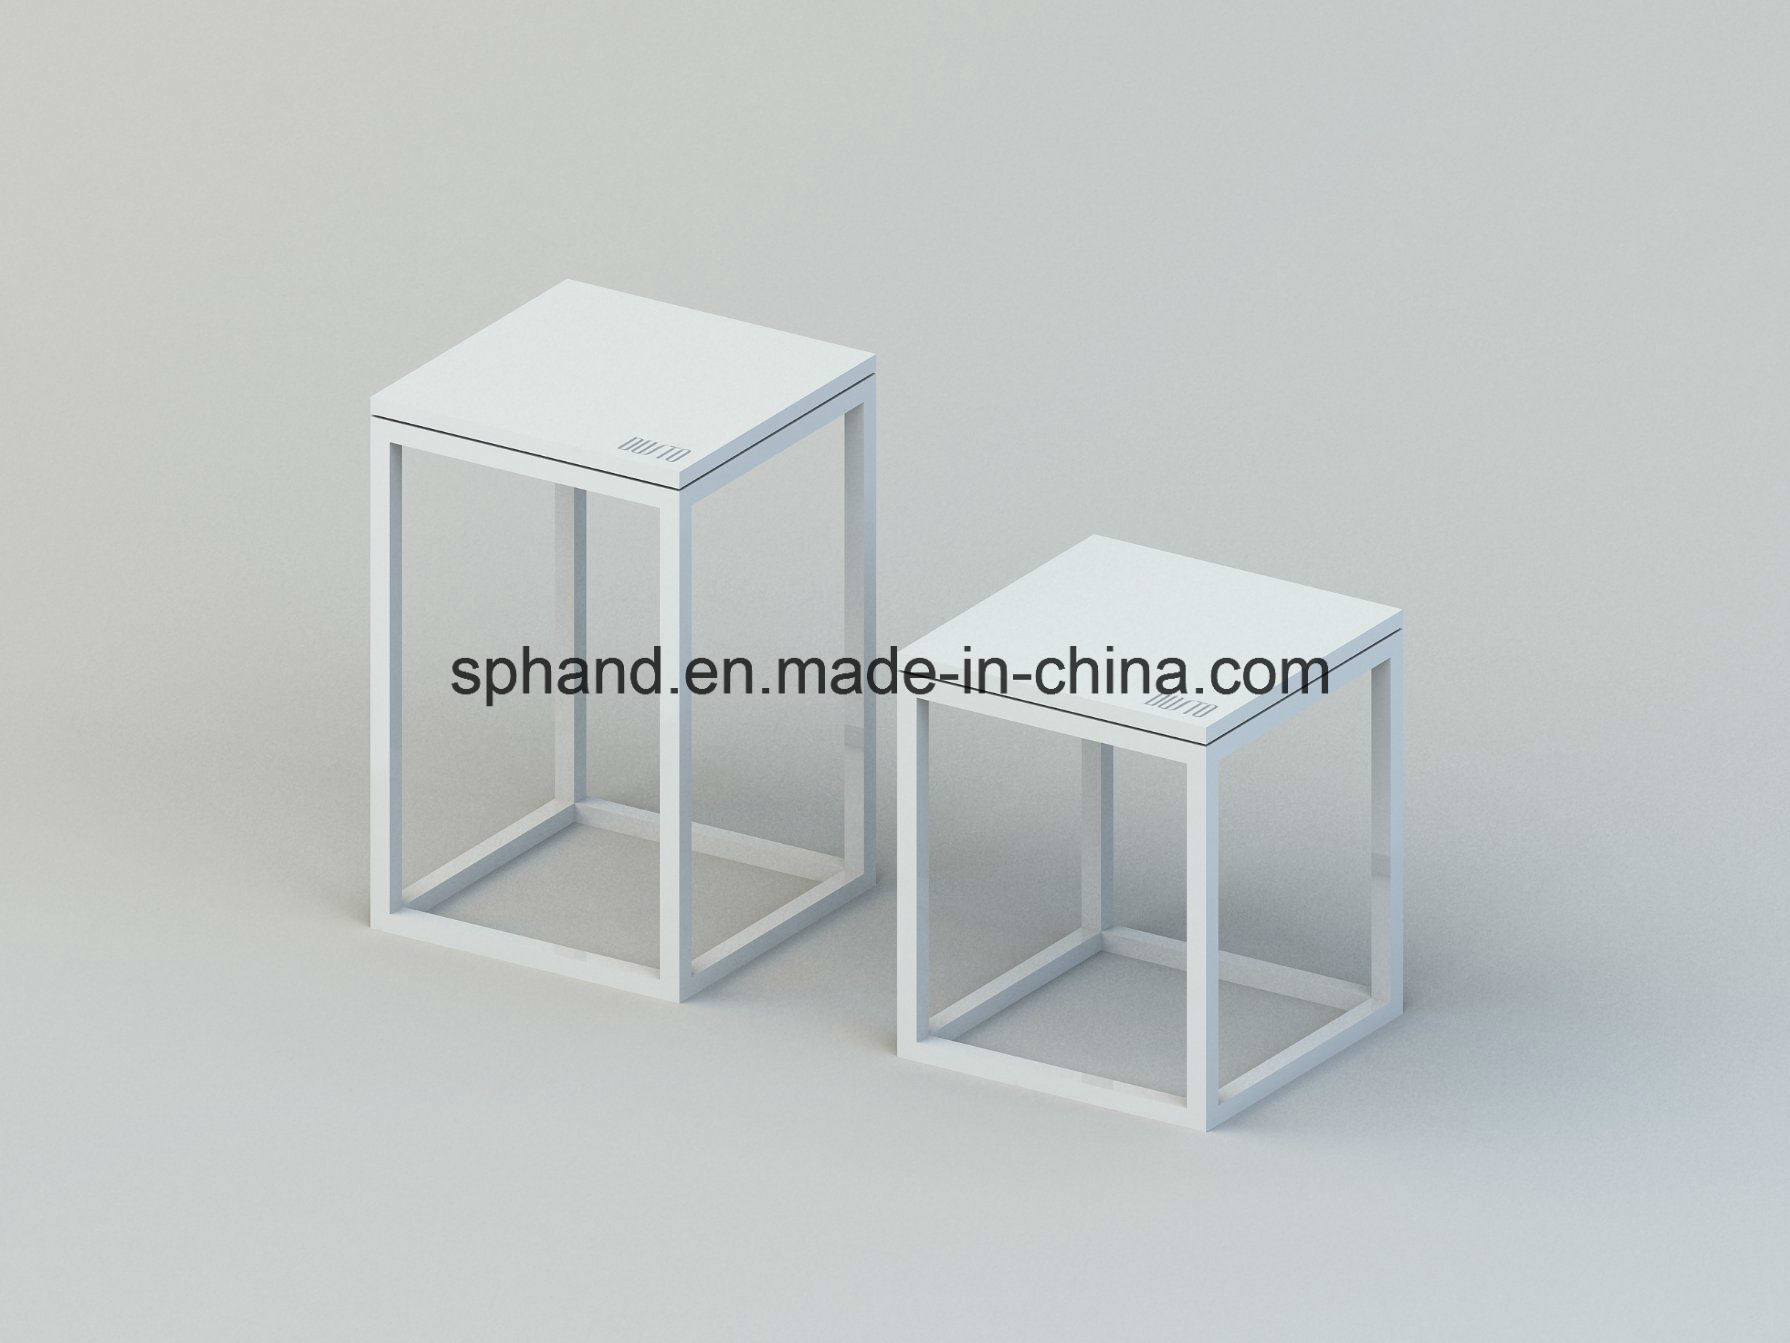 /proimages/2f0j00DtfUSjraqGbF/pure-white-window-display-rack-for-shoes-accessories.jpg